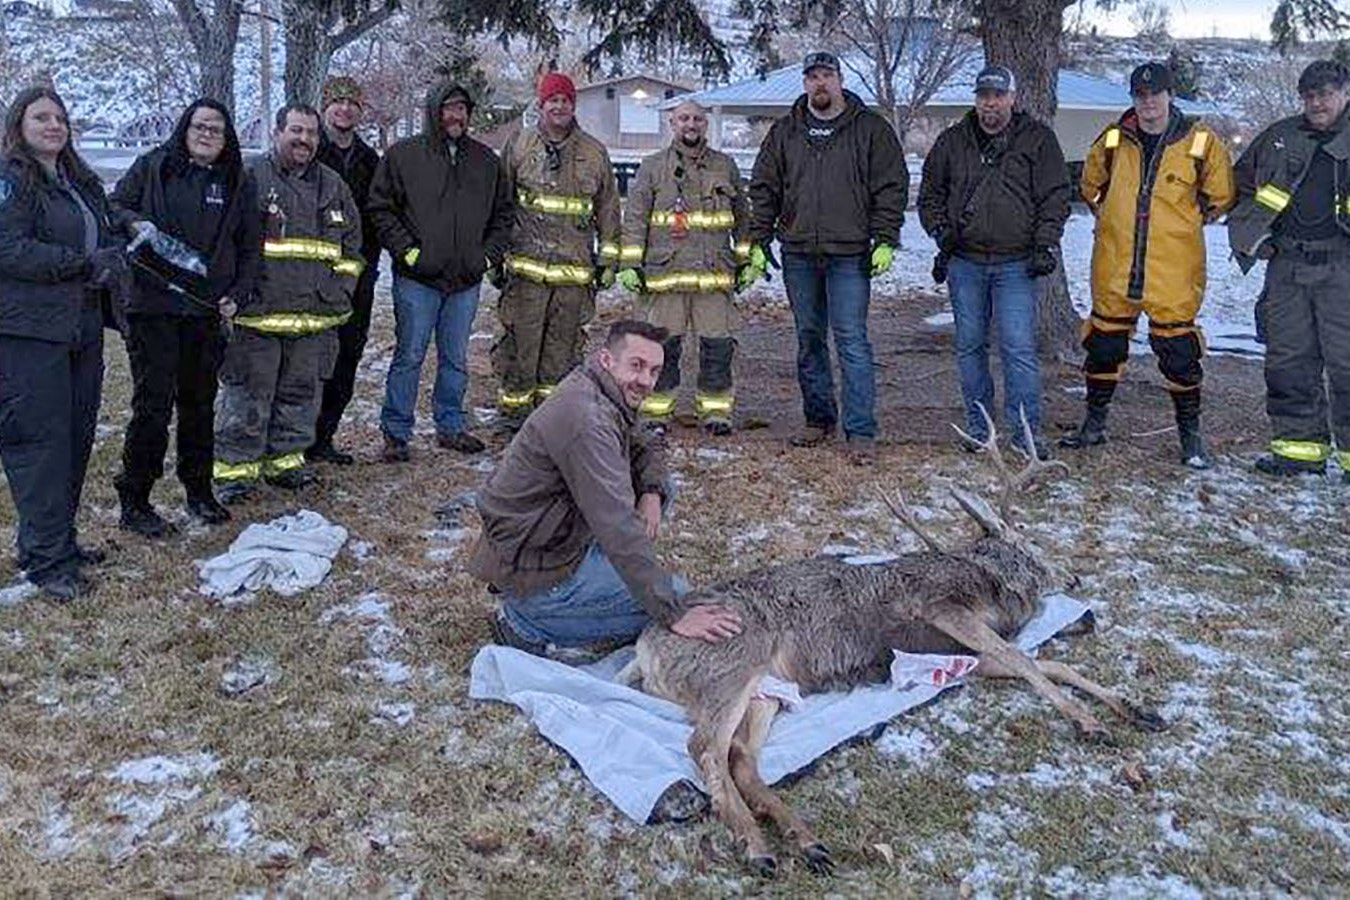 Members of the Green River Fire Department and its Swift Water Rescue Team with a large deer buck that broke through the ice at Expedition Island Sunday afternoon.